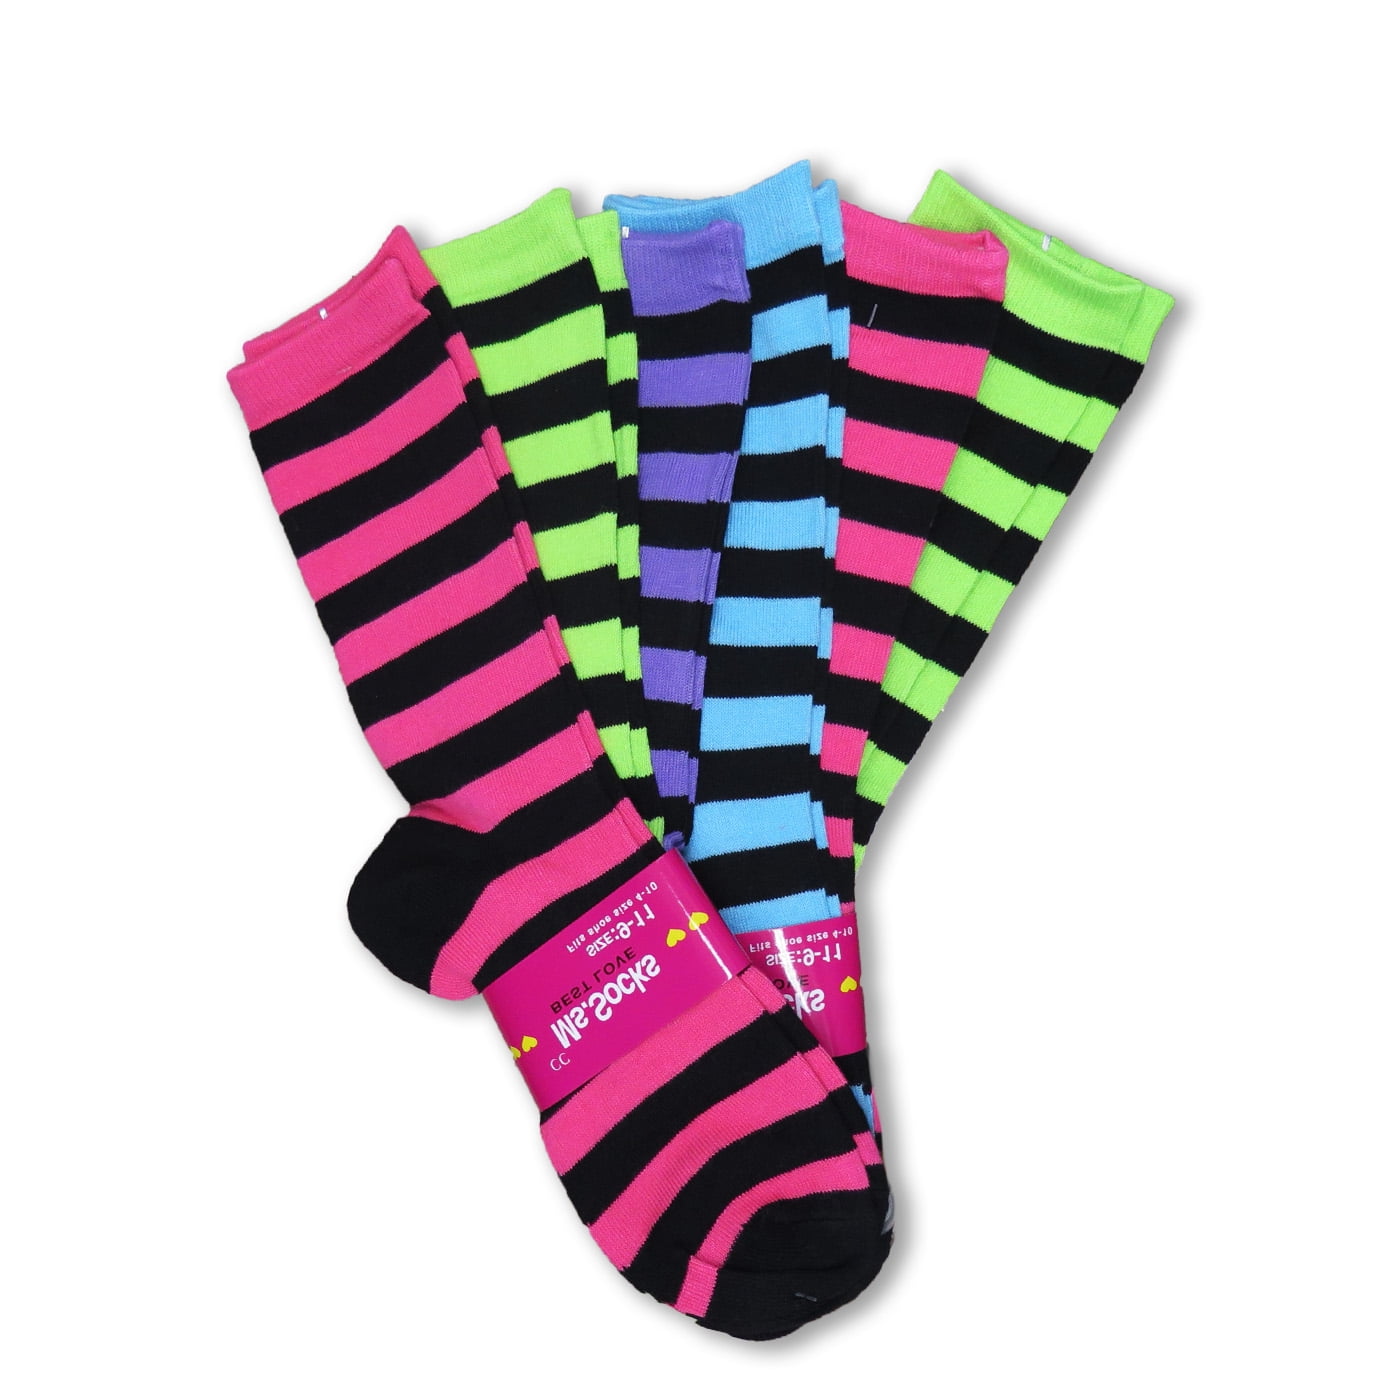 Womens Multi Color Bright Basic Fun Patterns Striped Dots 6 Pack Assorted Crew Socks Bold